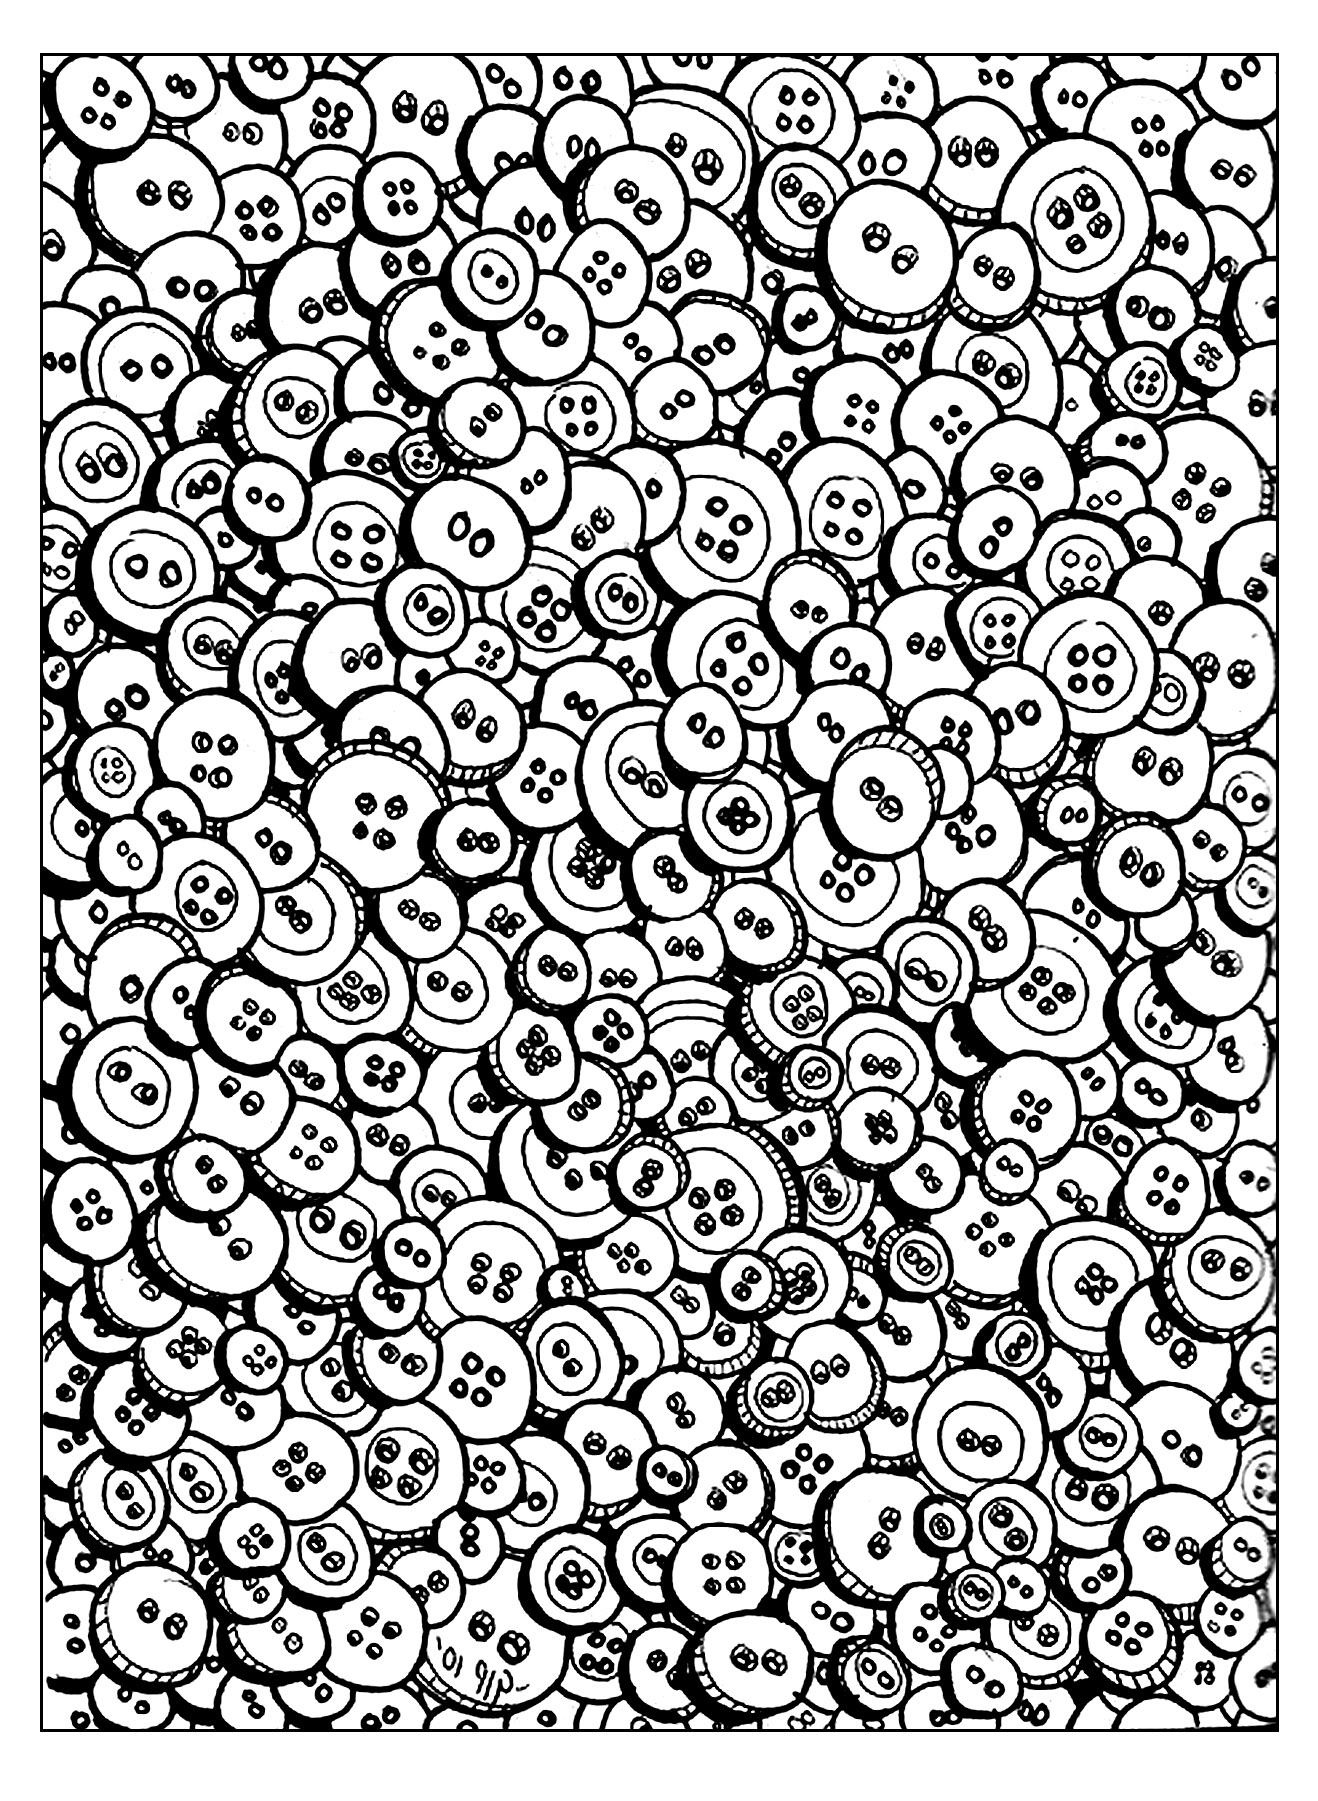 100 buttons - Unclassifiable Adult Coloring Pages